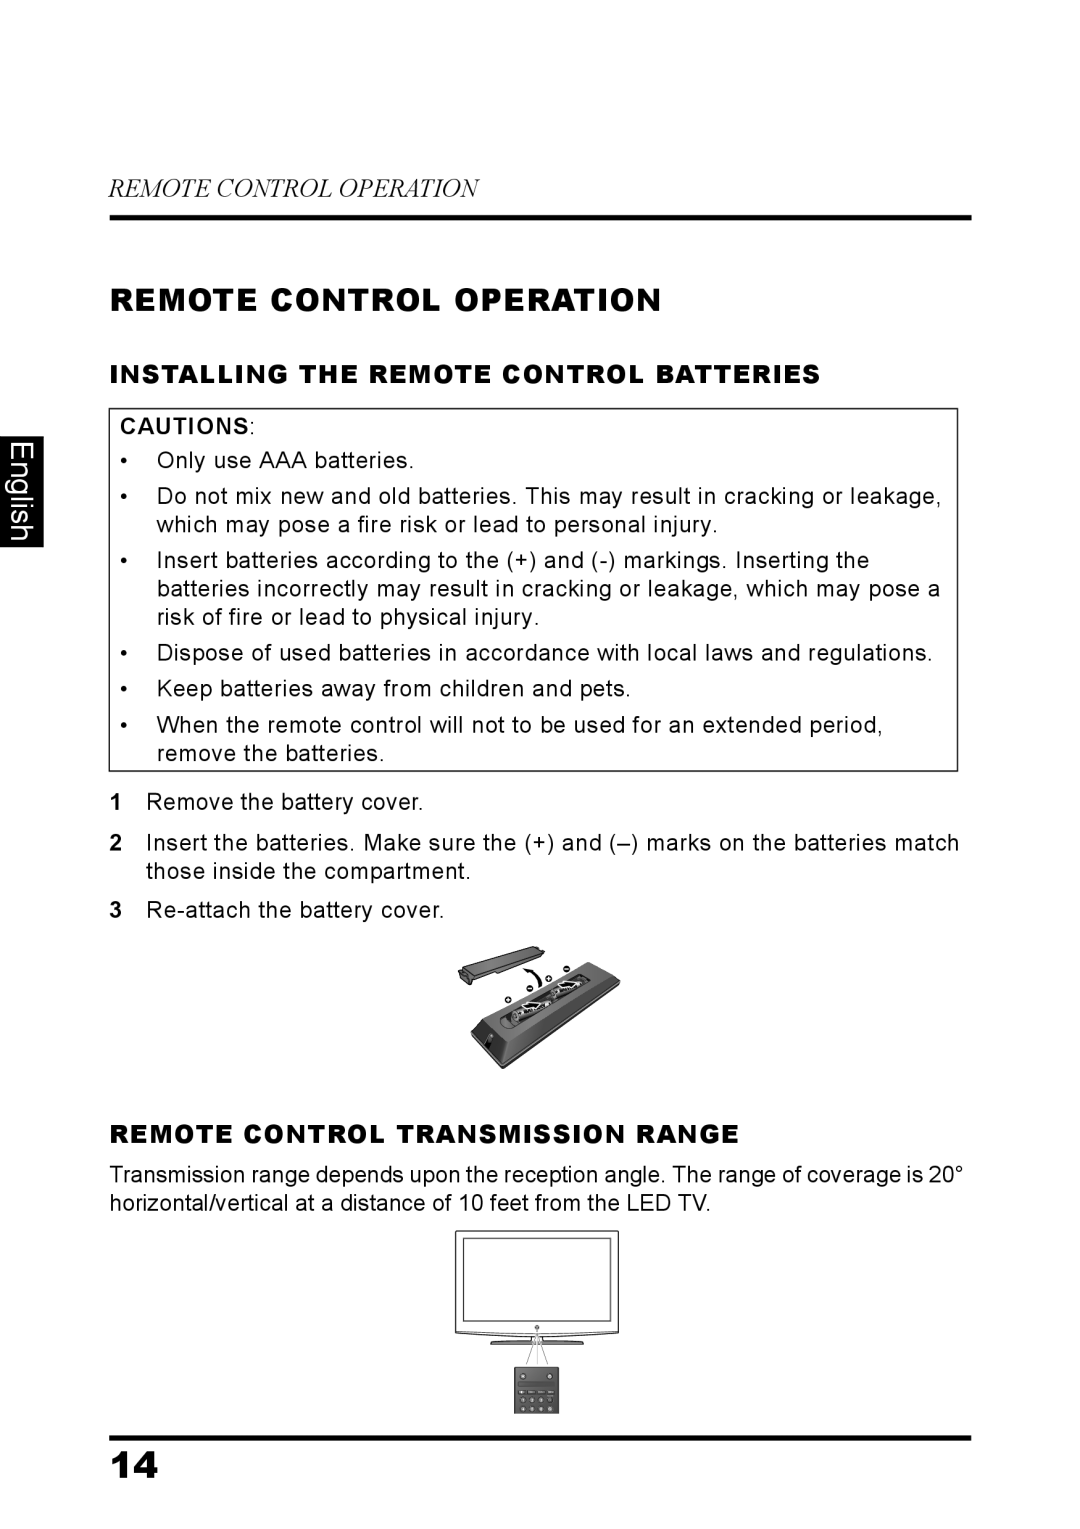 Westinghouse LD-3237 user manual Remote Control Operation, English, Installing The Remote Control Batteries 